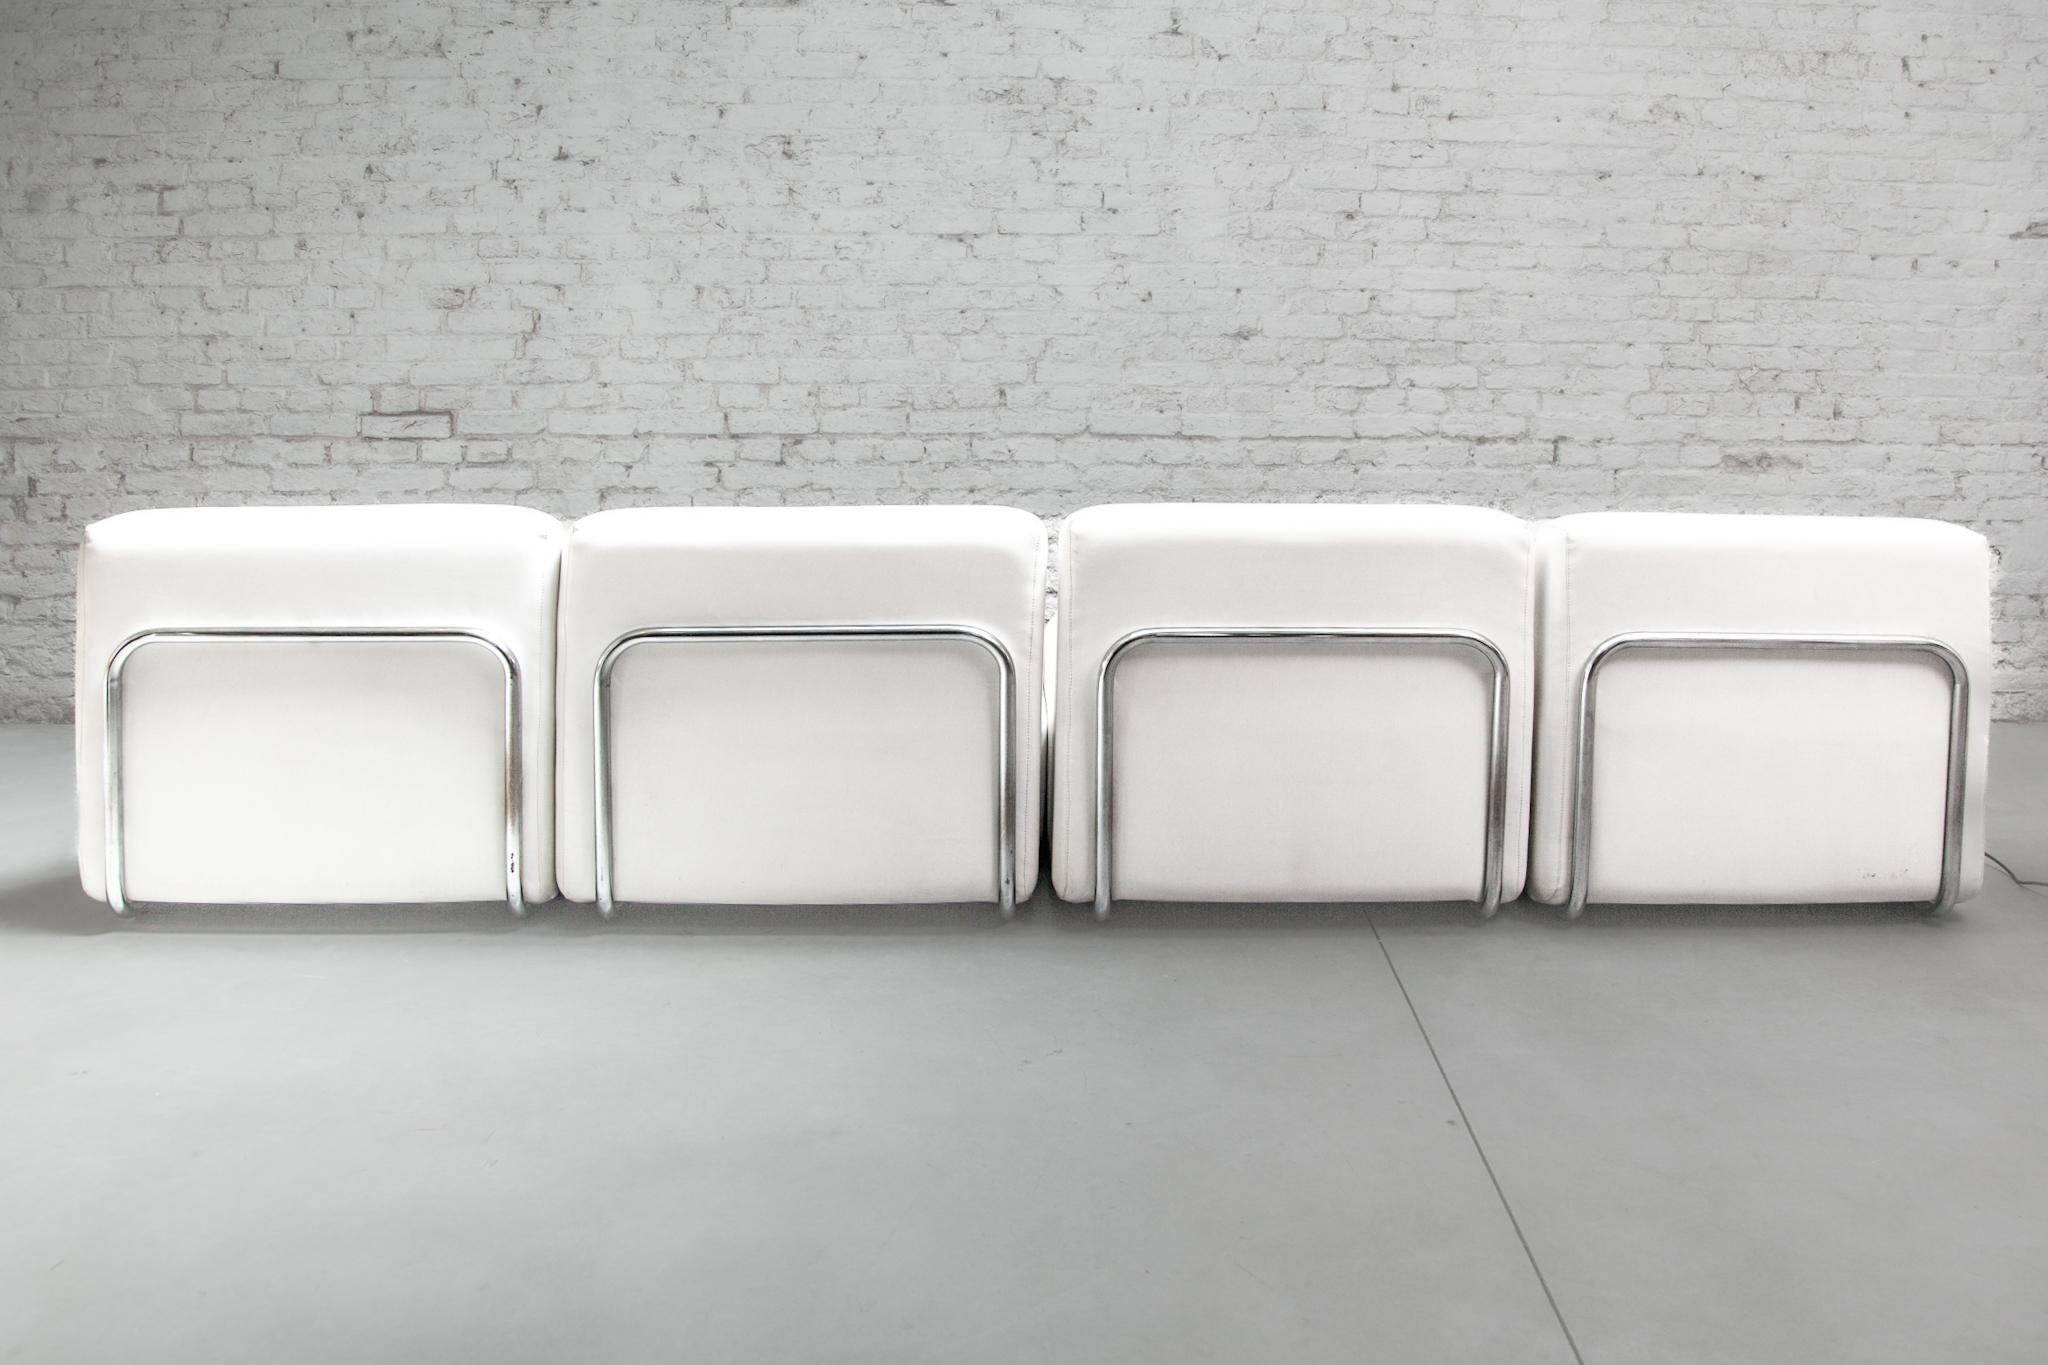 Modular Eight Chairs Living-roomset of Adriano Piazzesi Lounge Chairs and Stools 2